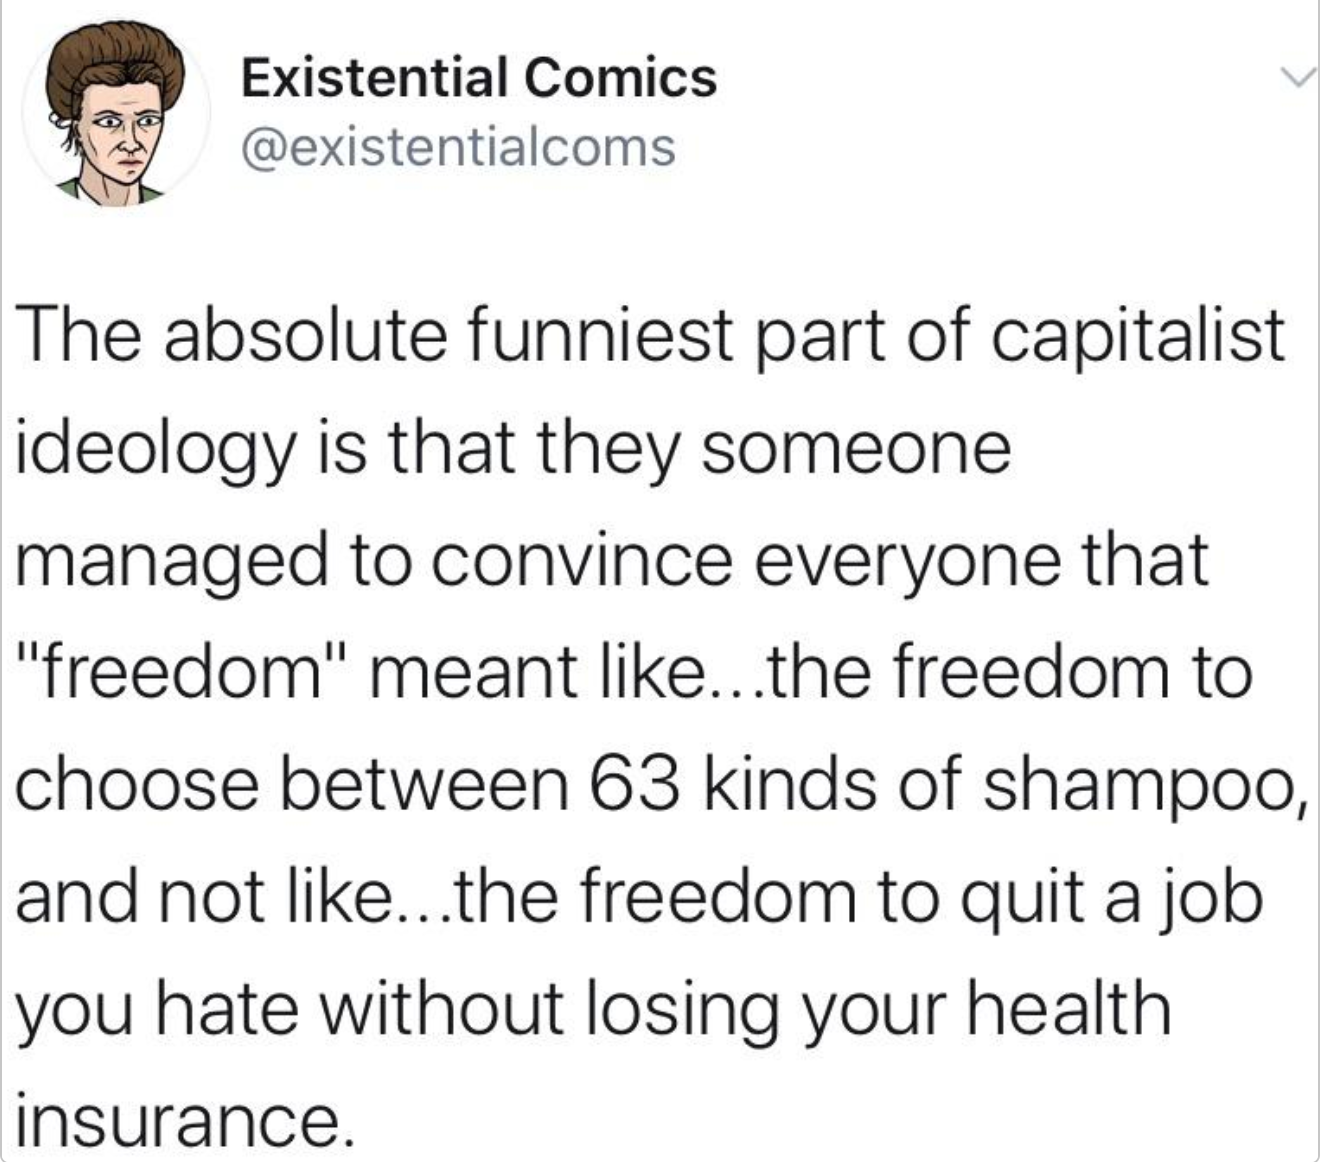 someone makes a racist joke - Existential Comics The absolute funniest part of capitalist ideology is that they someone managed to convince everyone that "freedom" meant ...the freedom to choose between 63 kinds of shampoo, and not ...the freedom to quit 